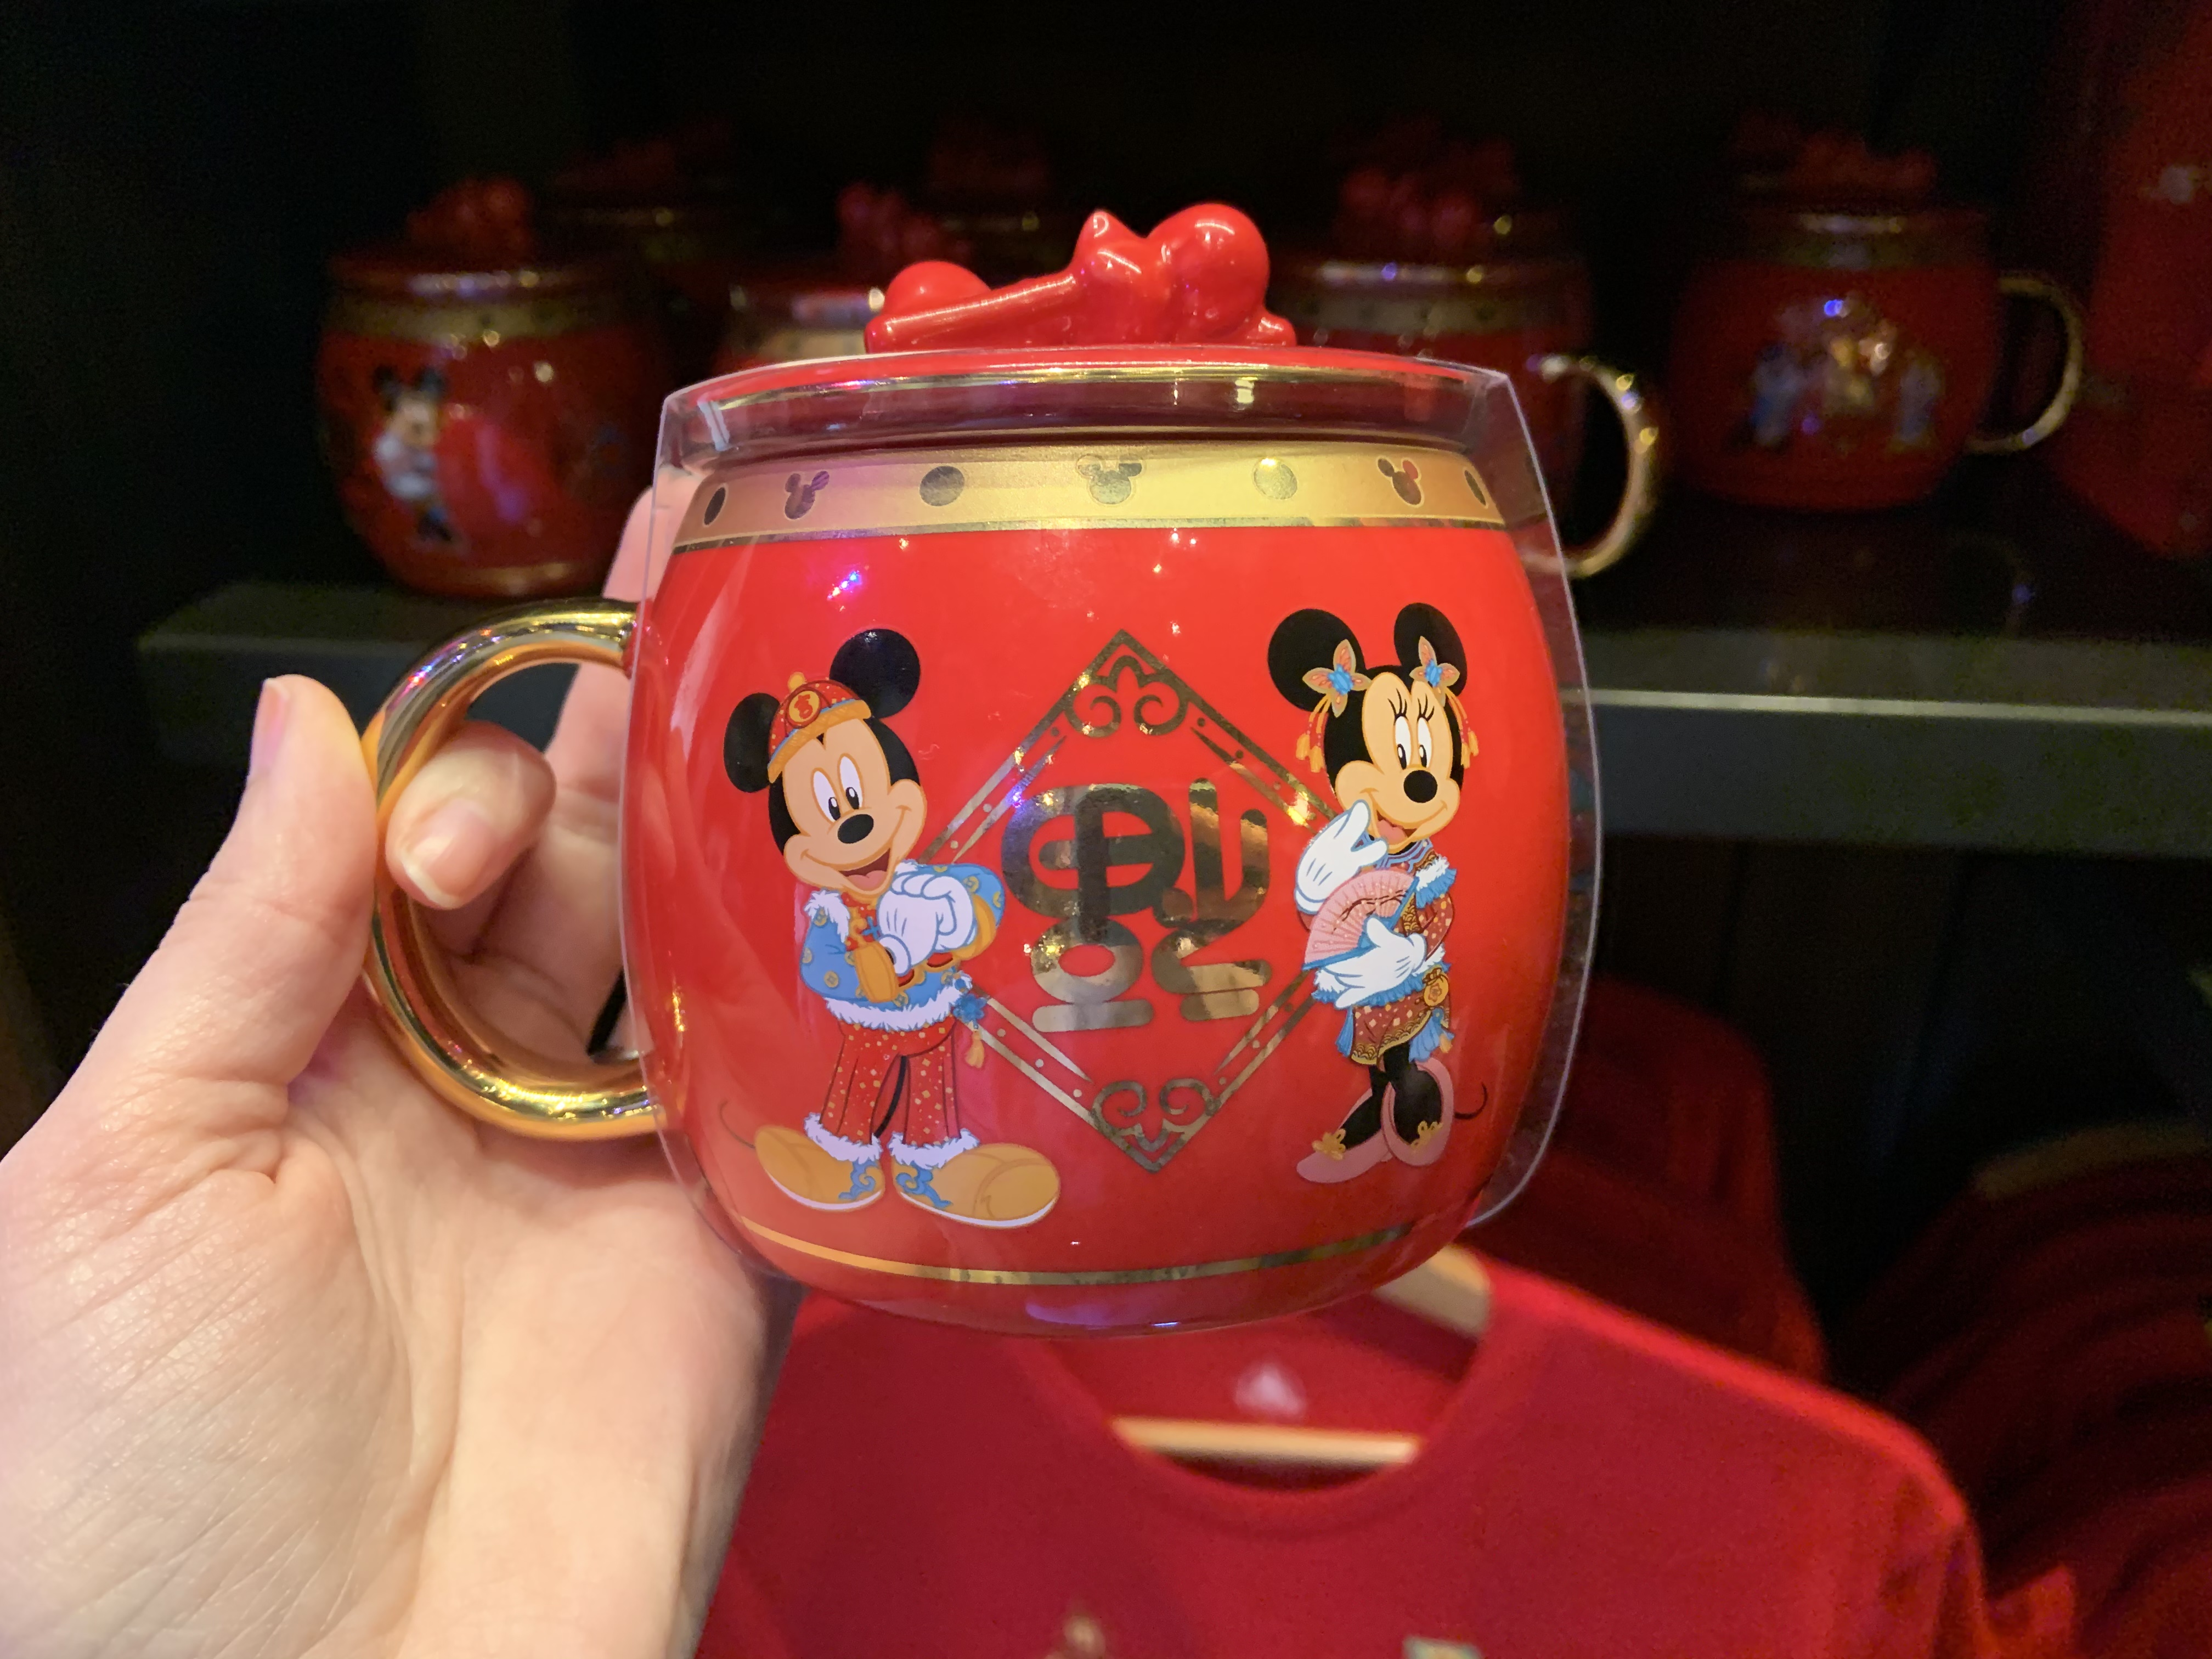 PHOTOS Lunar New Year Merchandise Celebrates the Year of the Mouse at